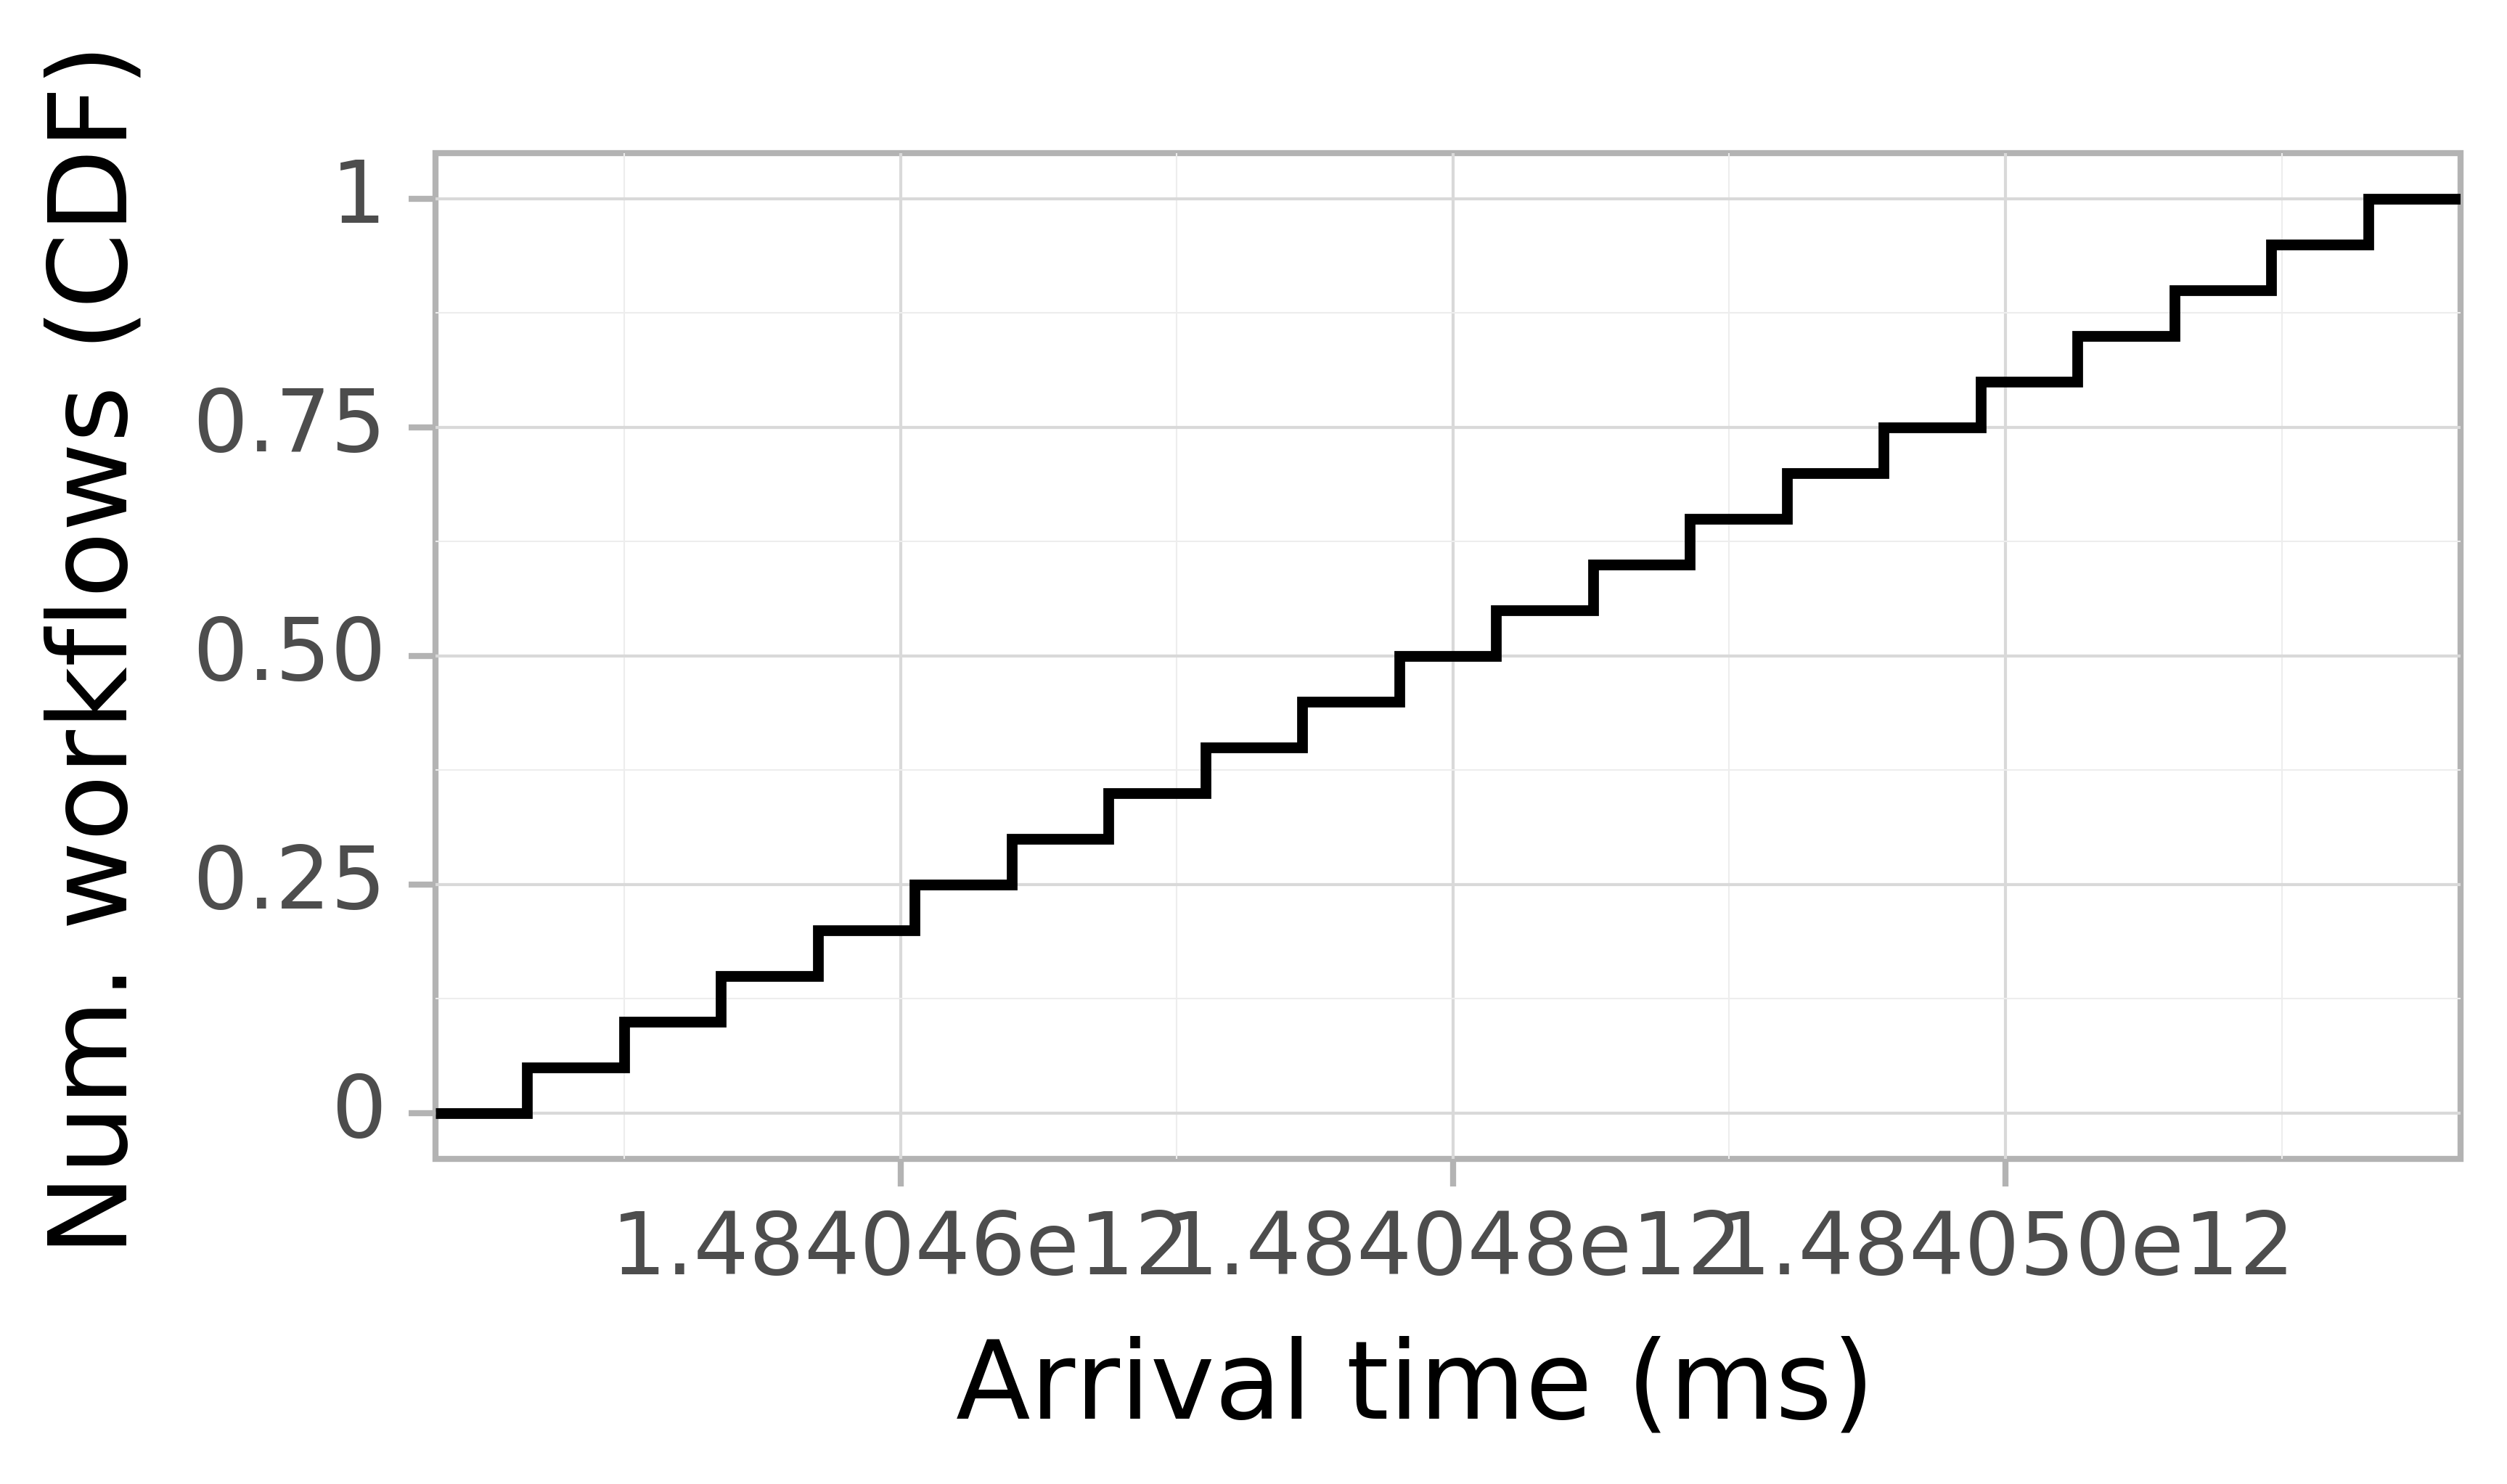 Job arrival CDF graph for the askalon-new_ee6 trace.